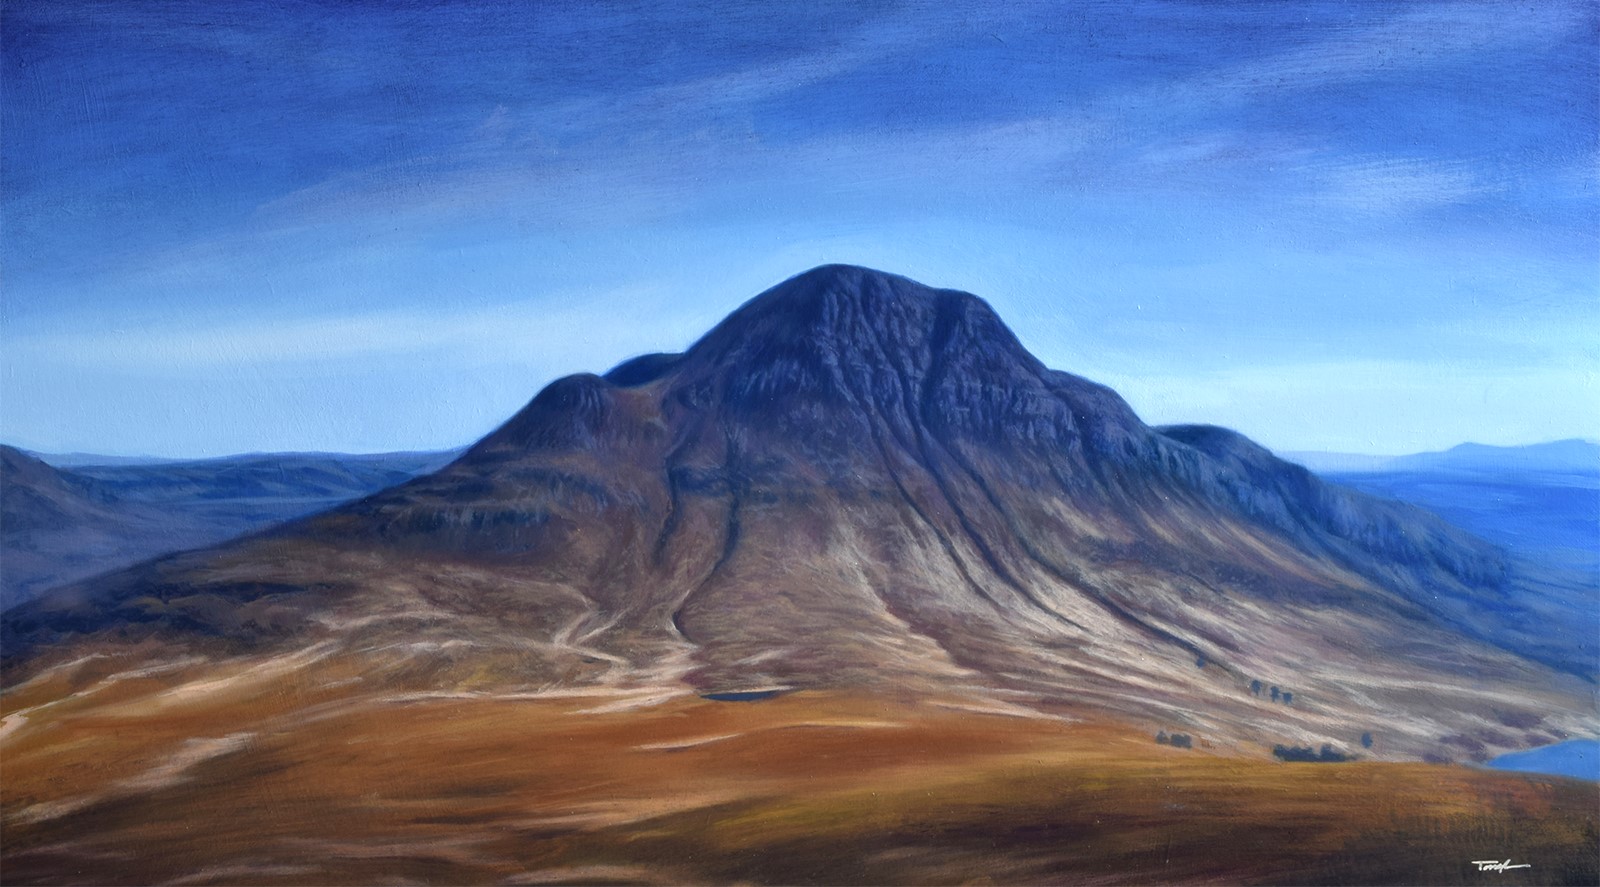 'Suilven' by artist Andrew Tough